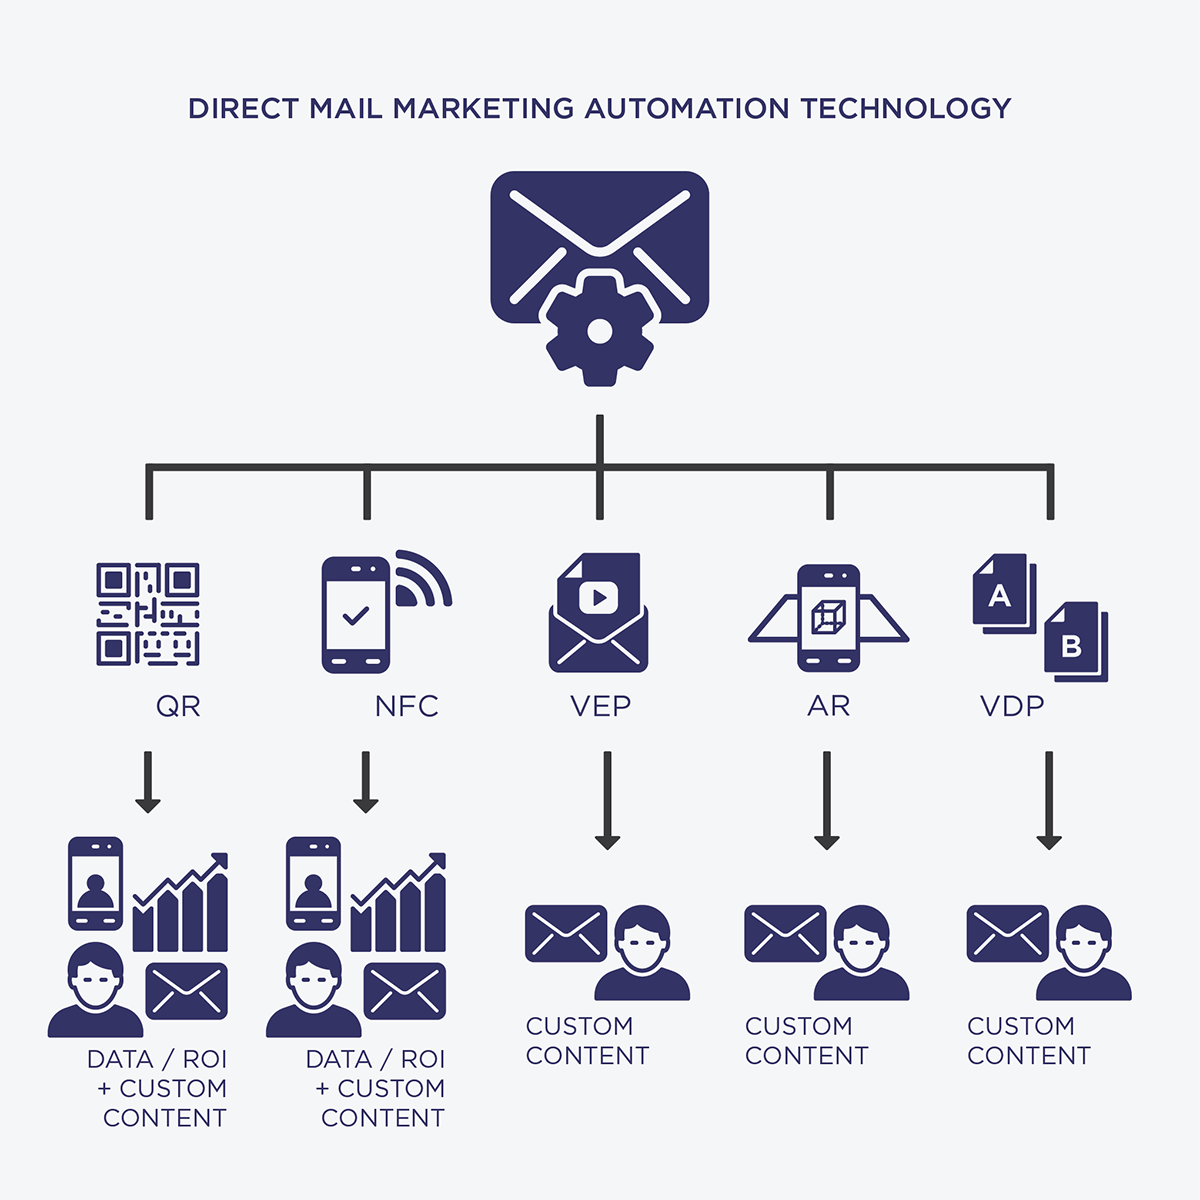 A chart that illustrates direct mail marketing automation technology.